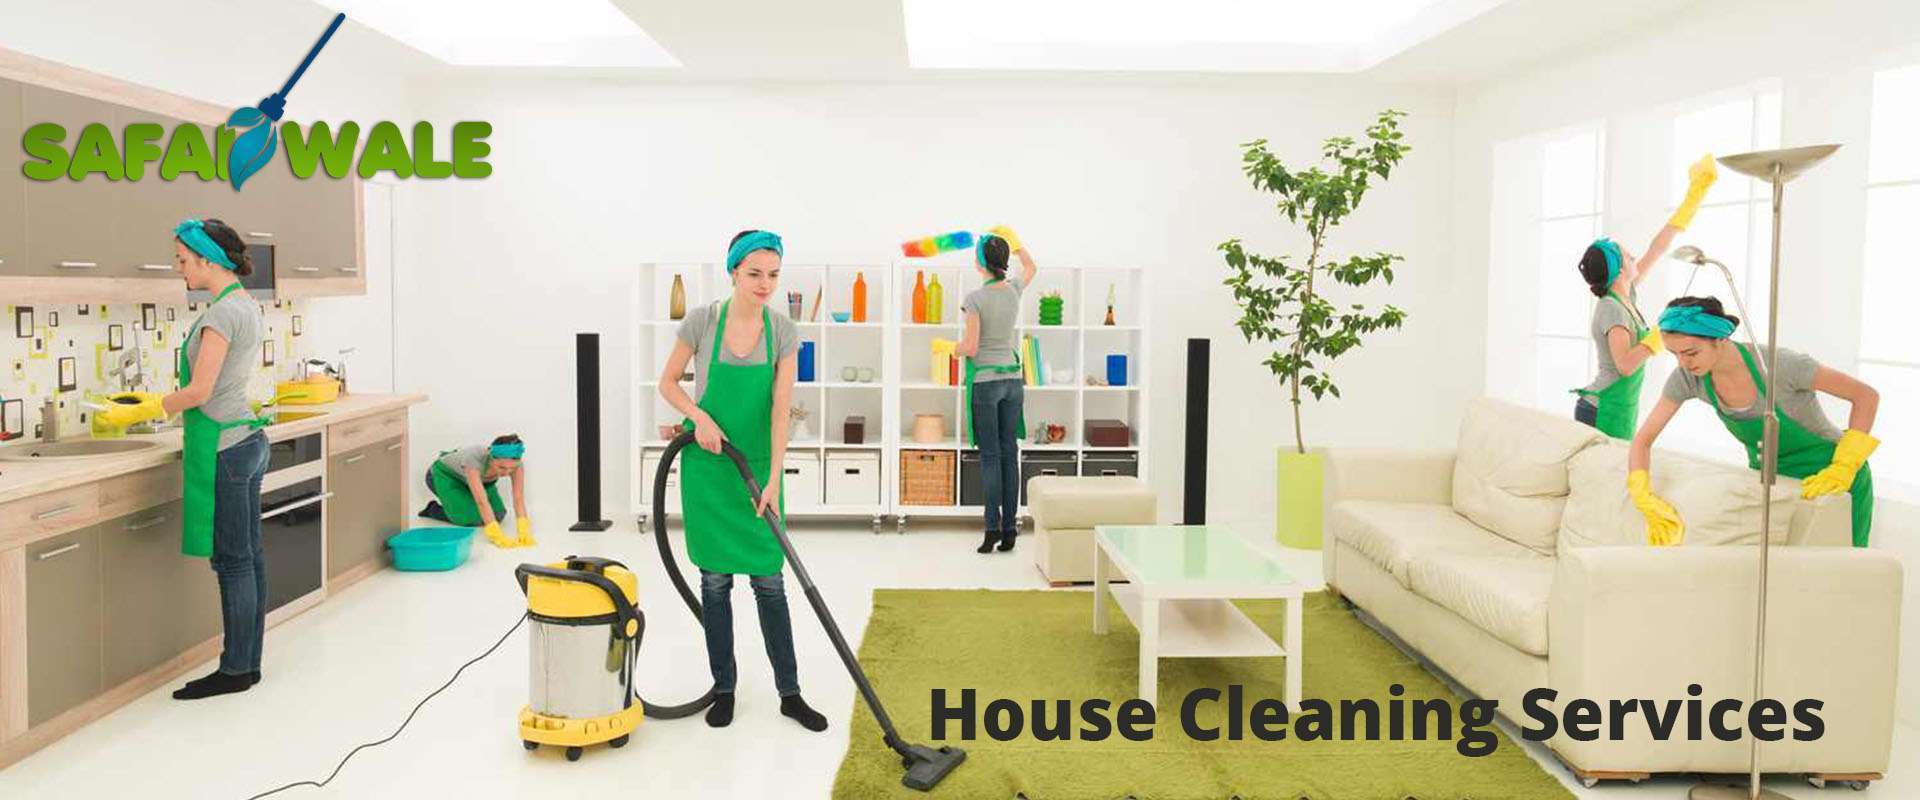 Best House Cleaning Services In Gurgaon - Safaiwale